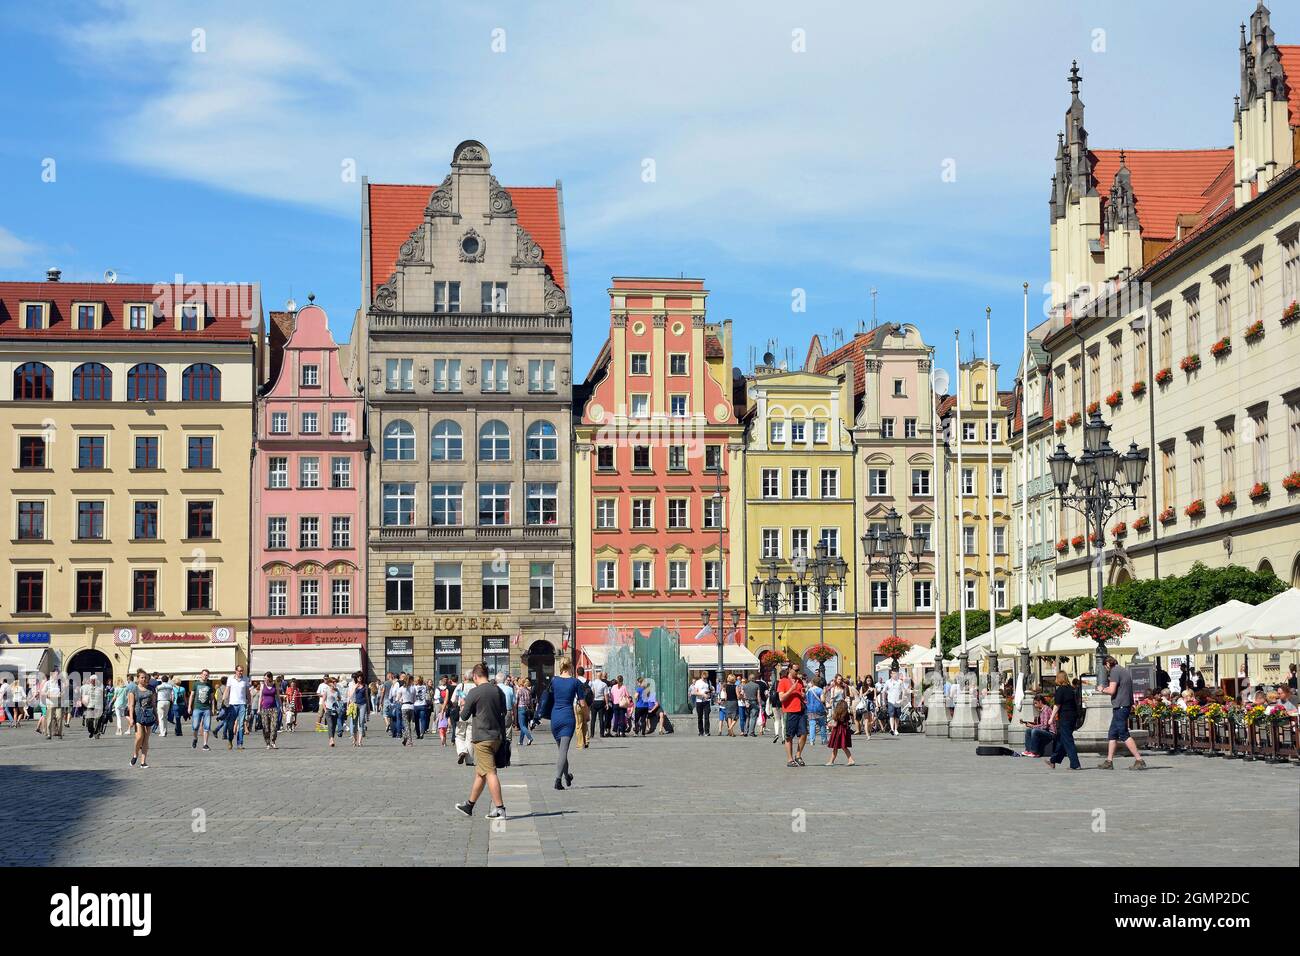 Square in the historical Old Town of Wroclaw - Poland. Stock Photo